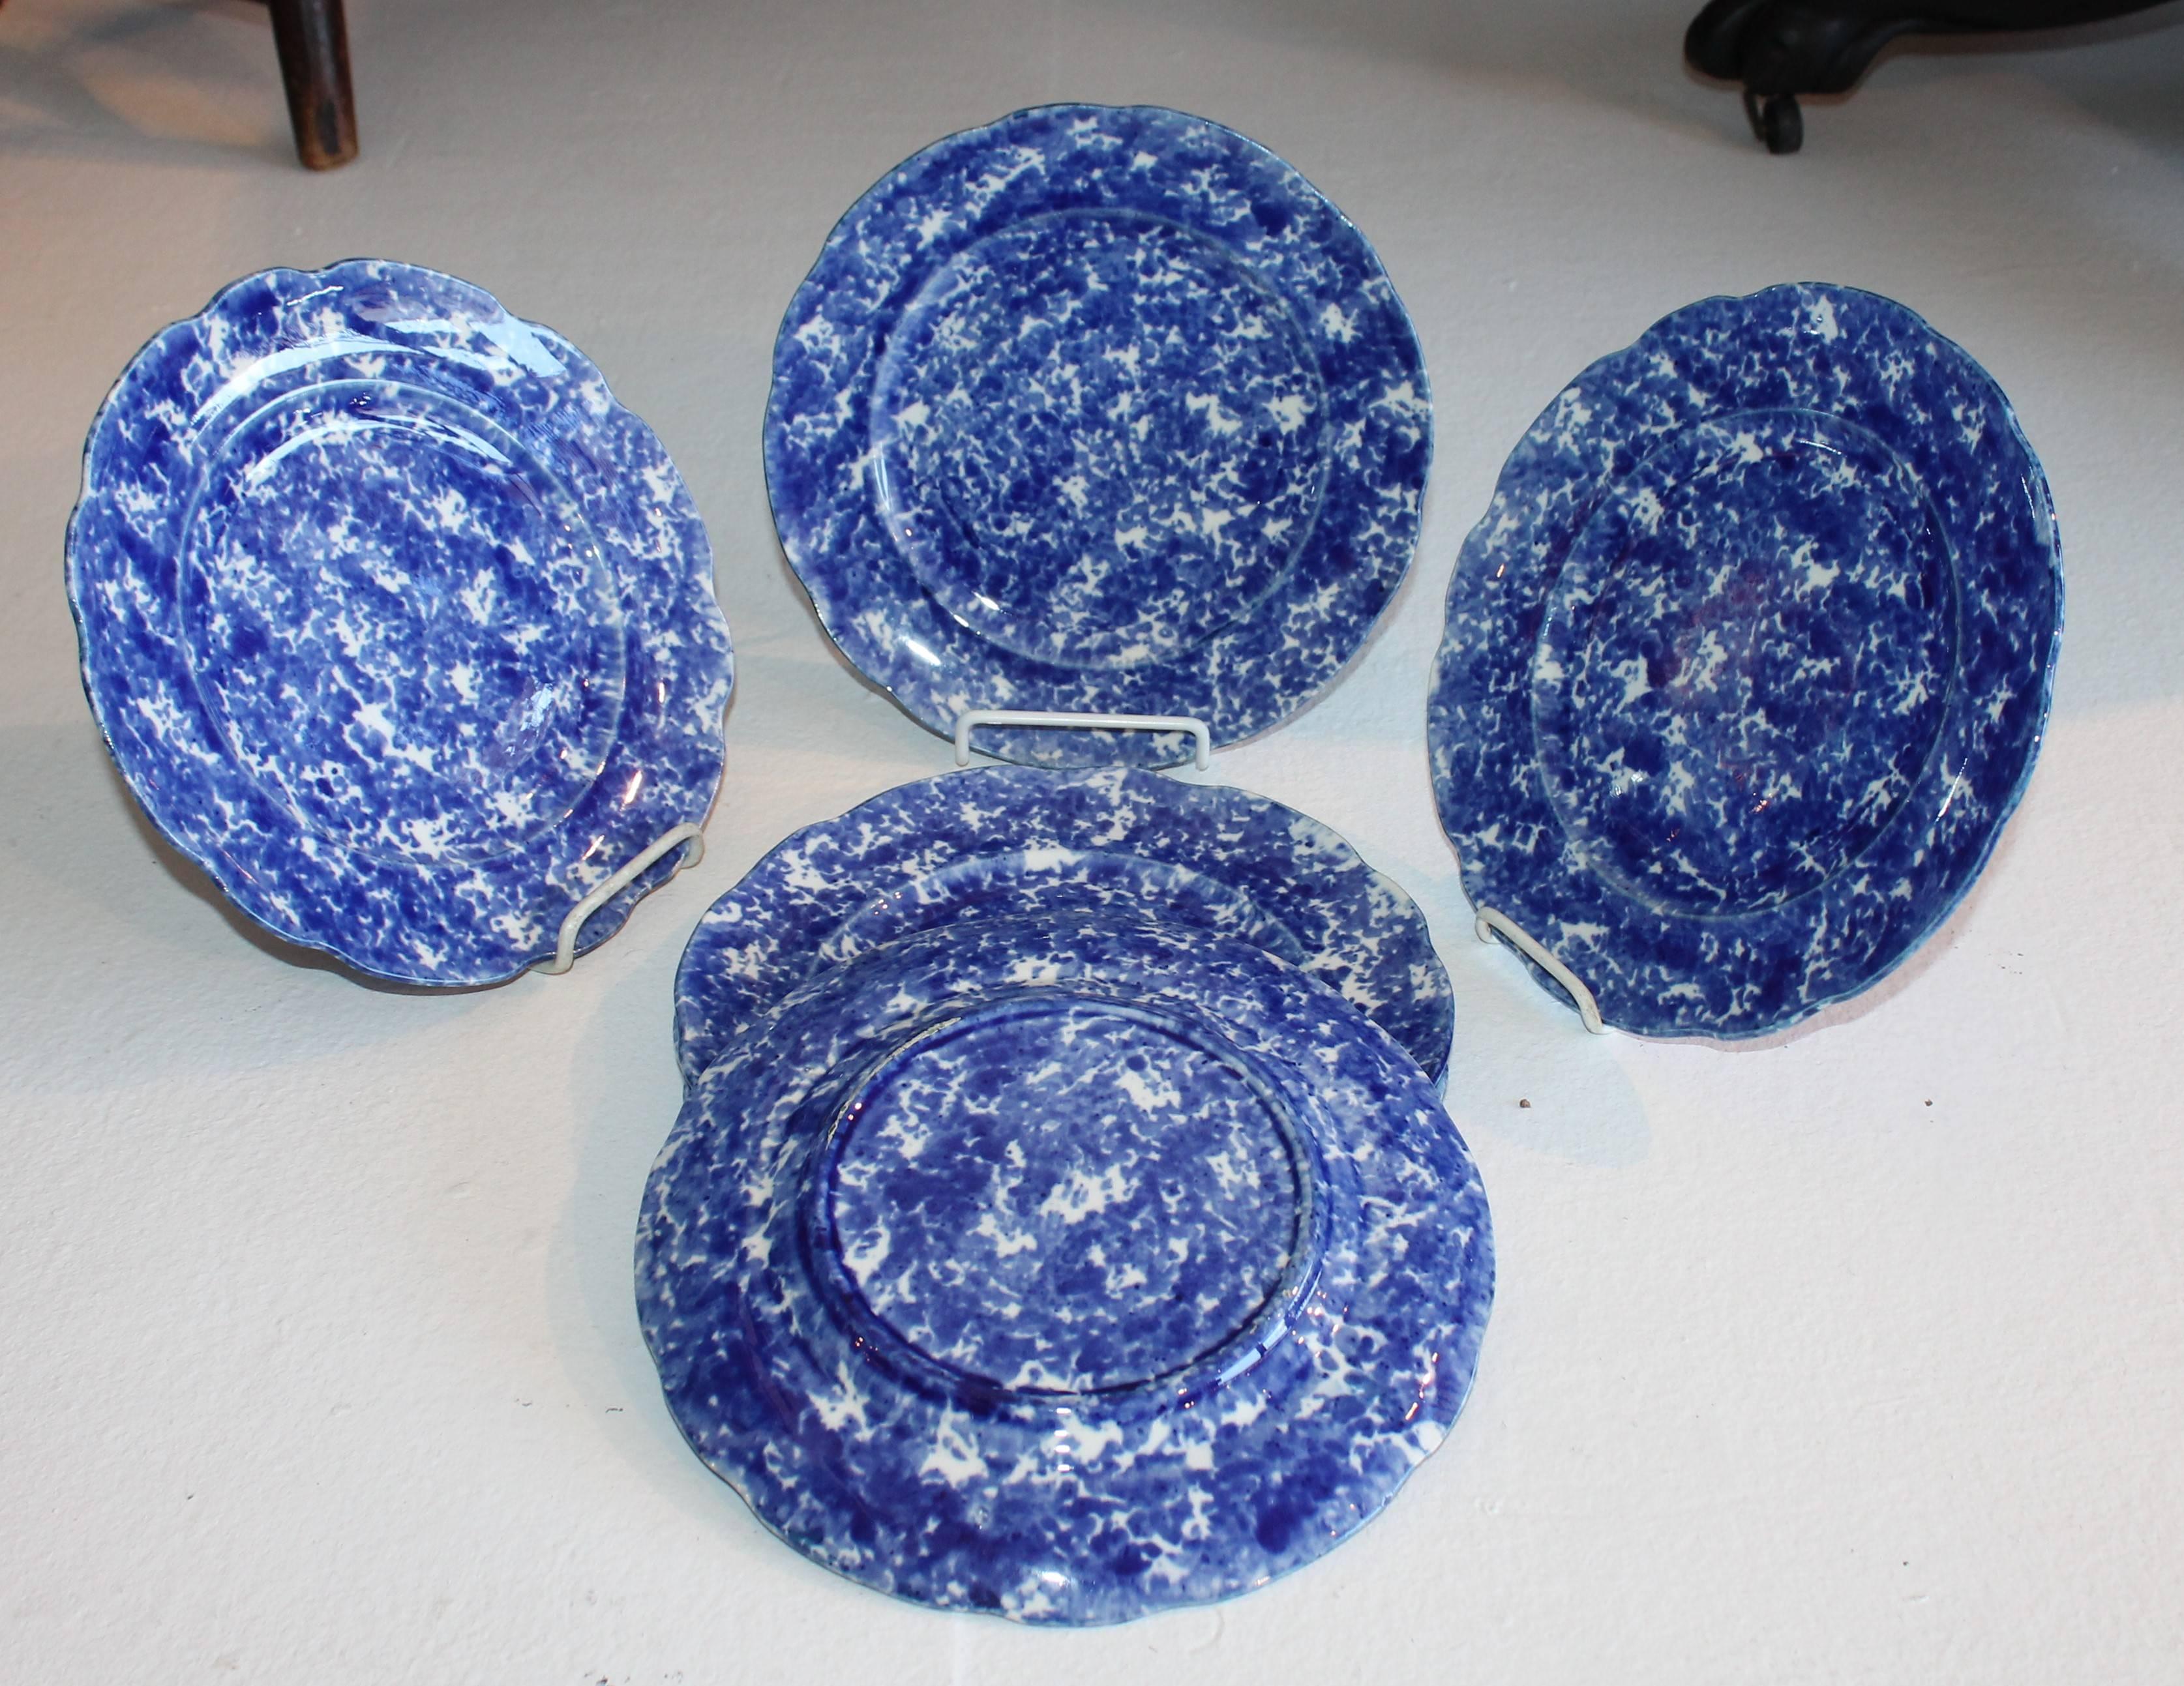 This is a collectors dream! Six matching blue and white matching sponge ware pottery dinner plates. They are all in pristine condition.